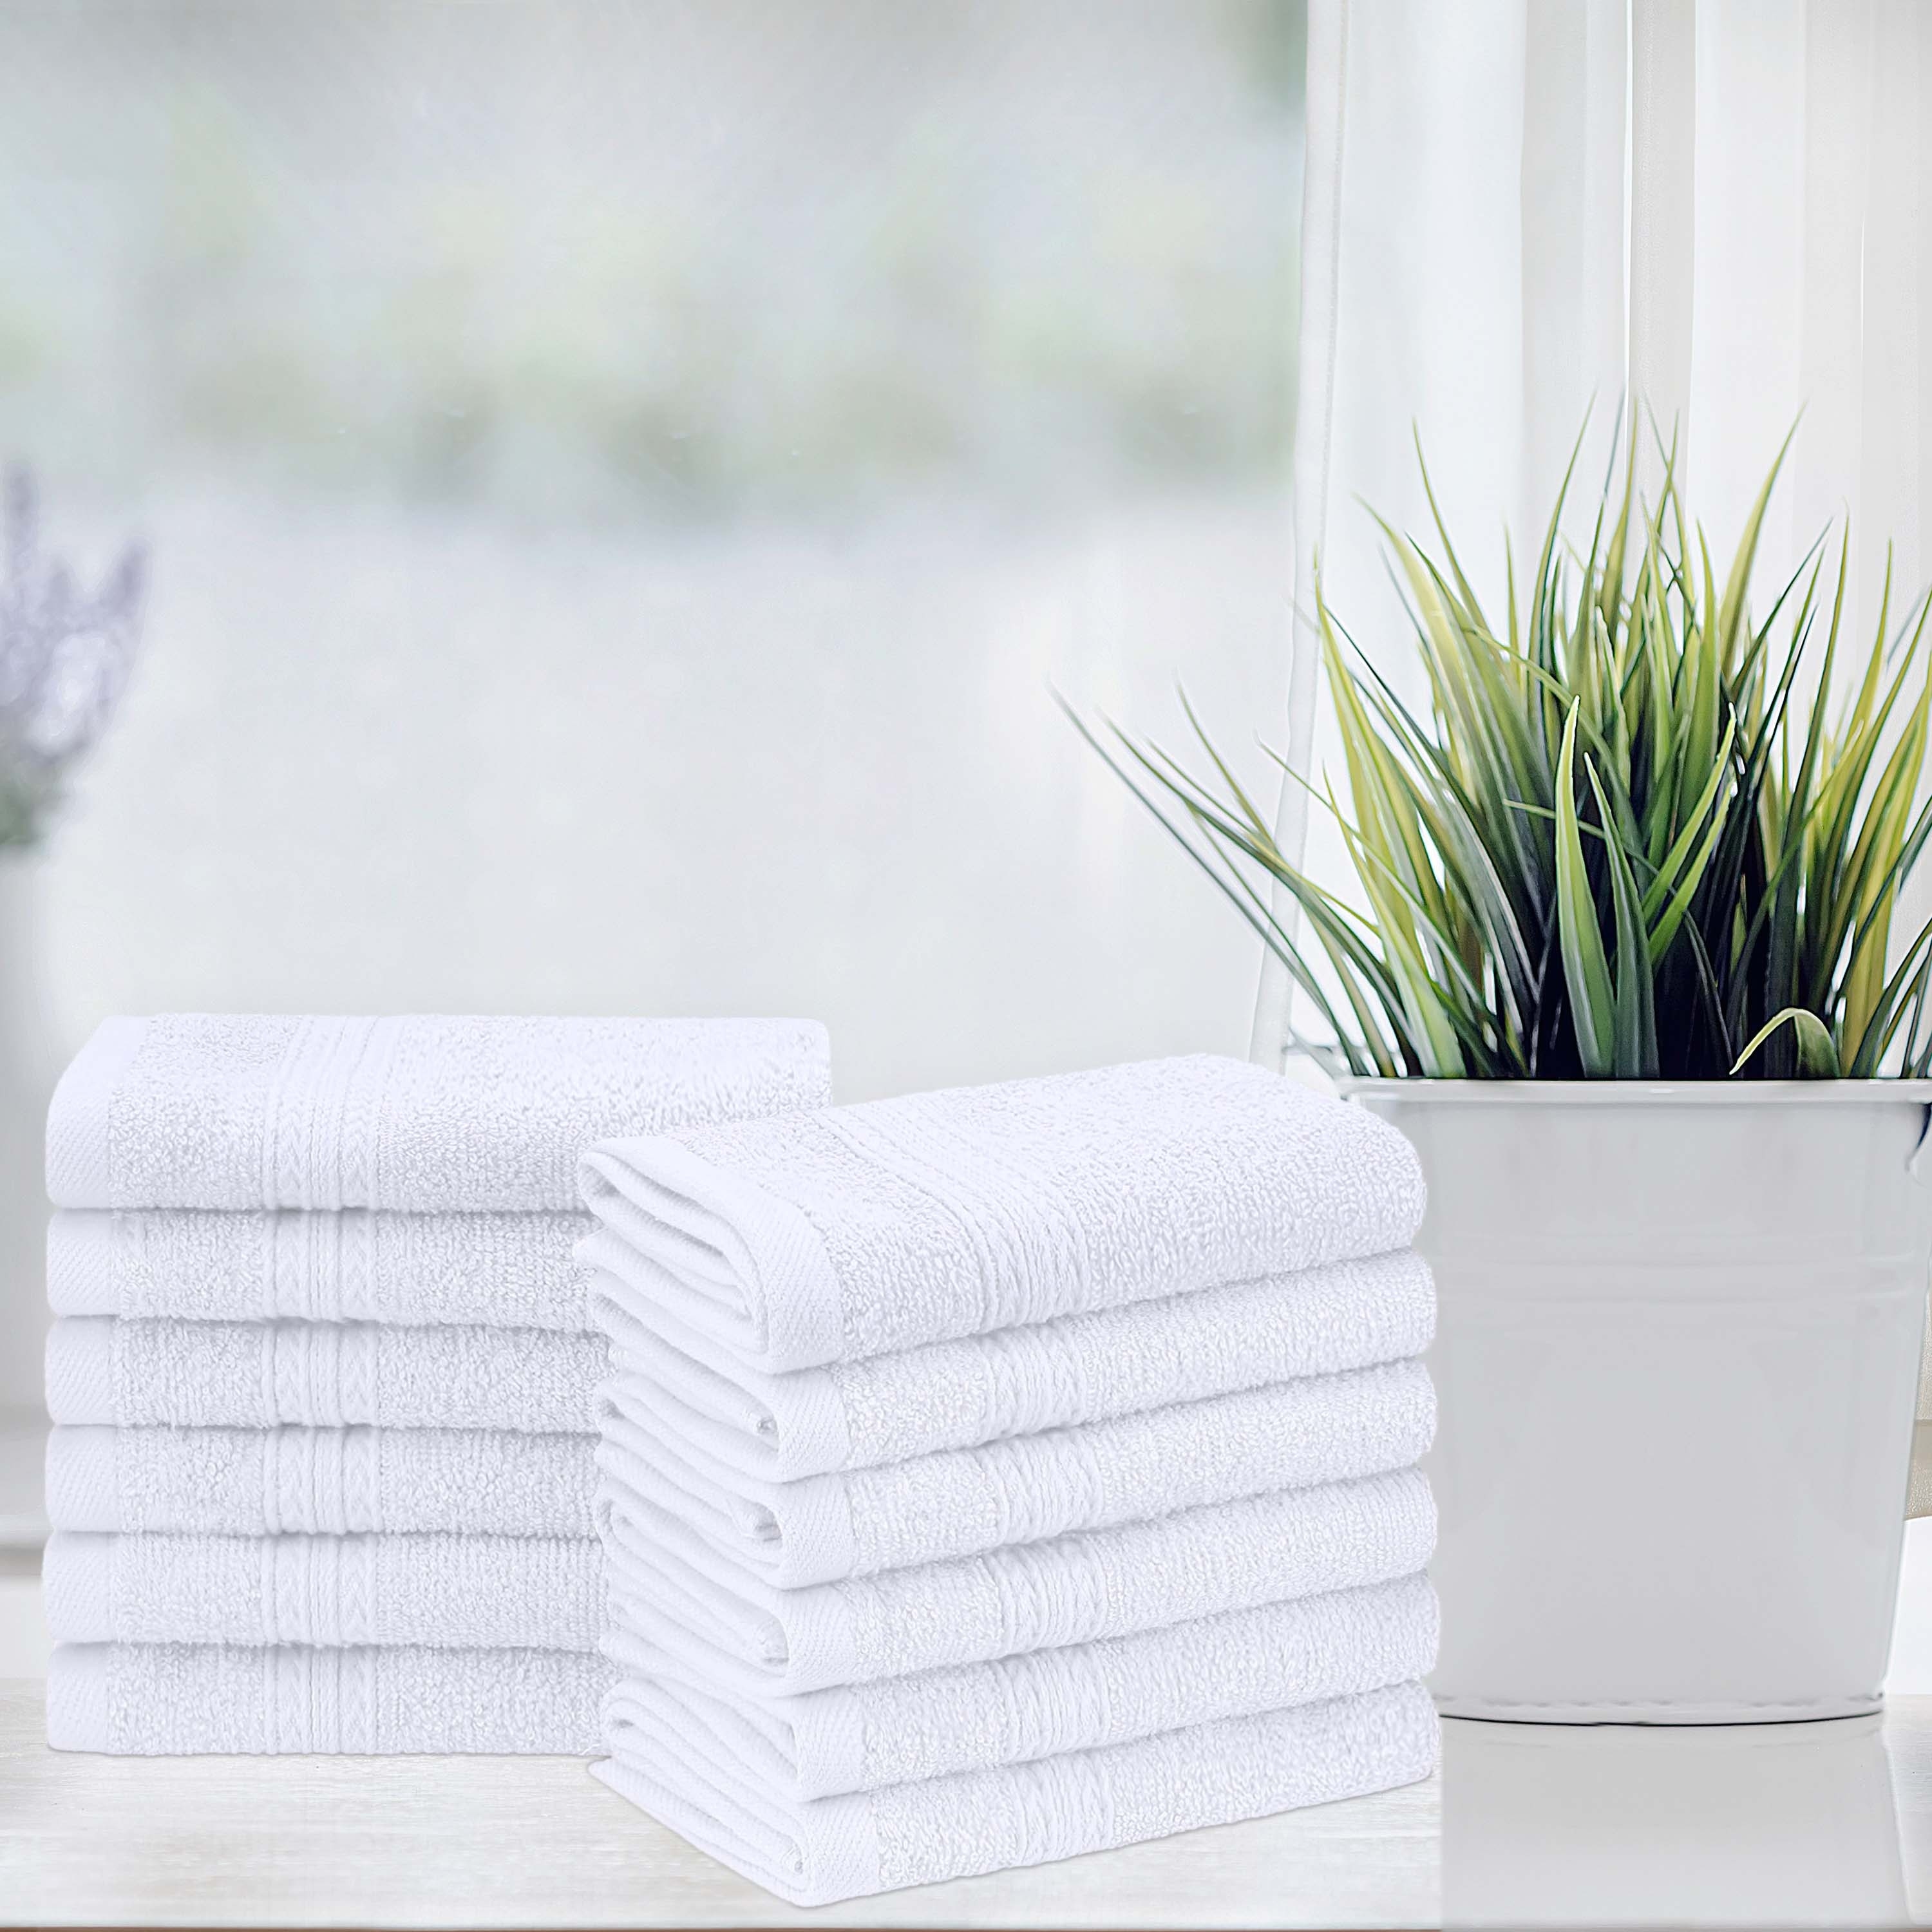 https://ak1.ostkcdn.com/images/products/is/images/direct/853998e06bf53693b6325393ac196a2745b81880/Eco-Friendly-Sustainable-Cotton-Washcloth-Set-of-12-by-Superior.jpg